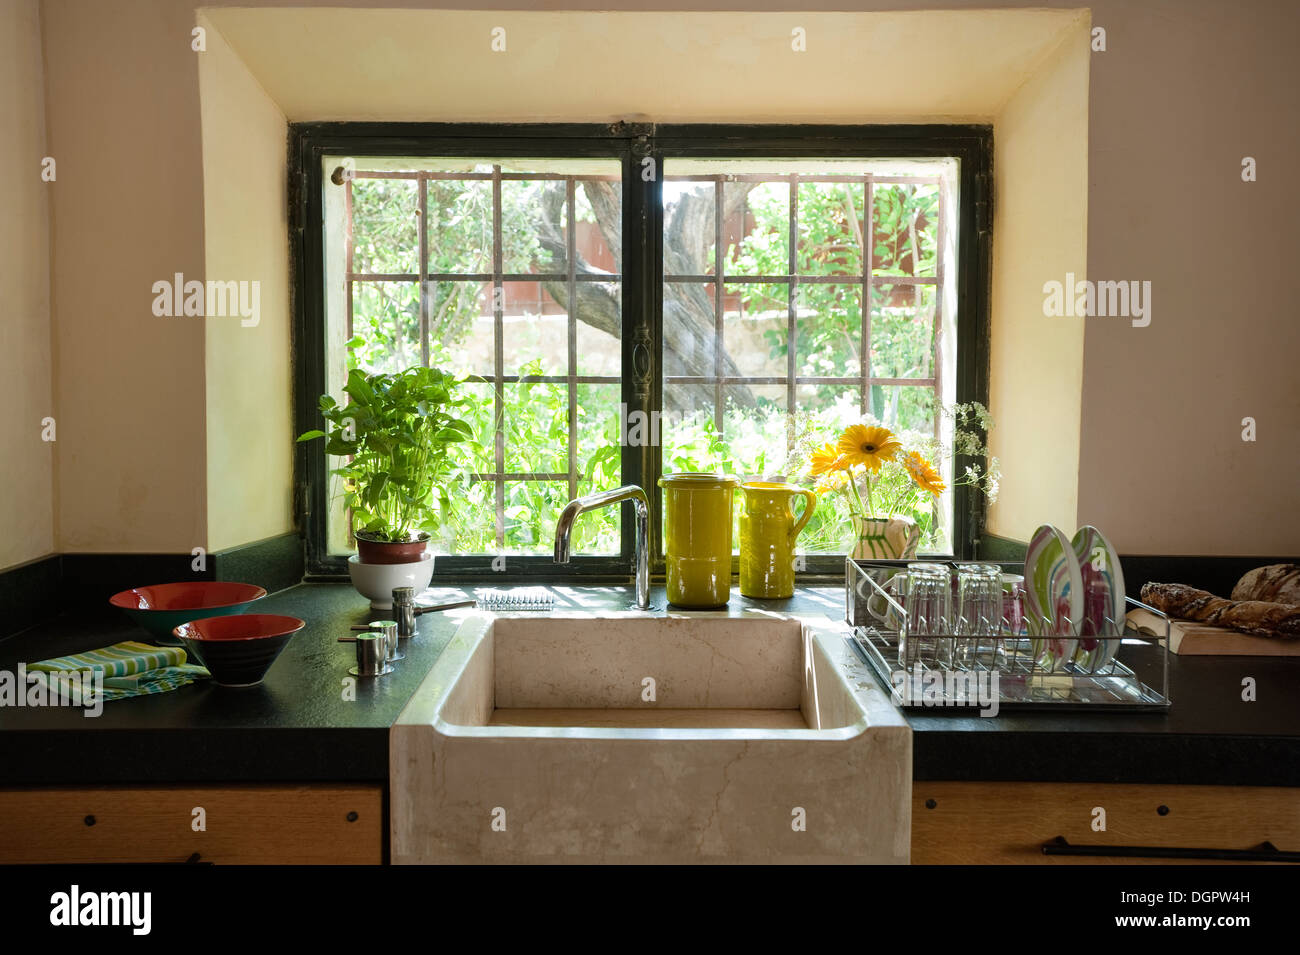 A Stone Farm Sink In Front Of An Old Paned Window Stock